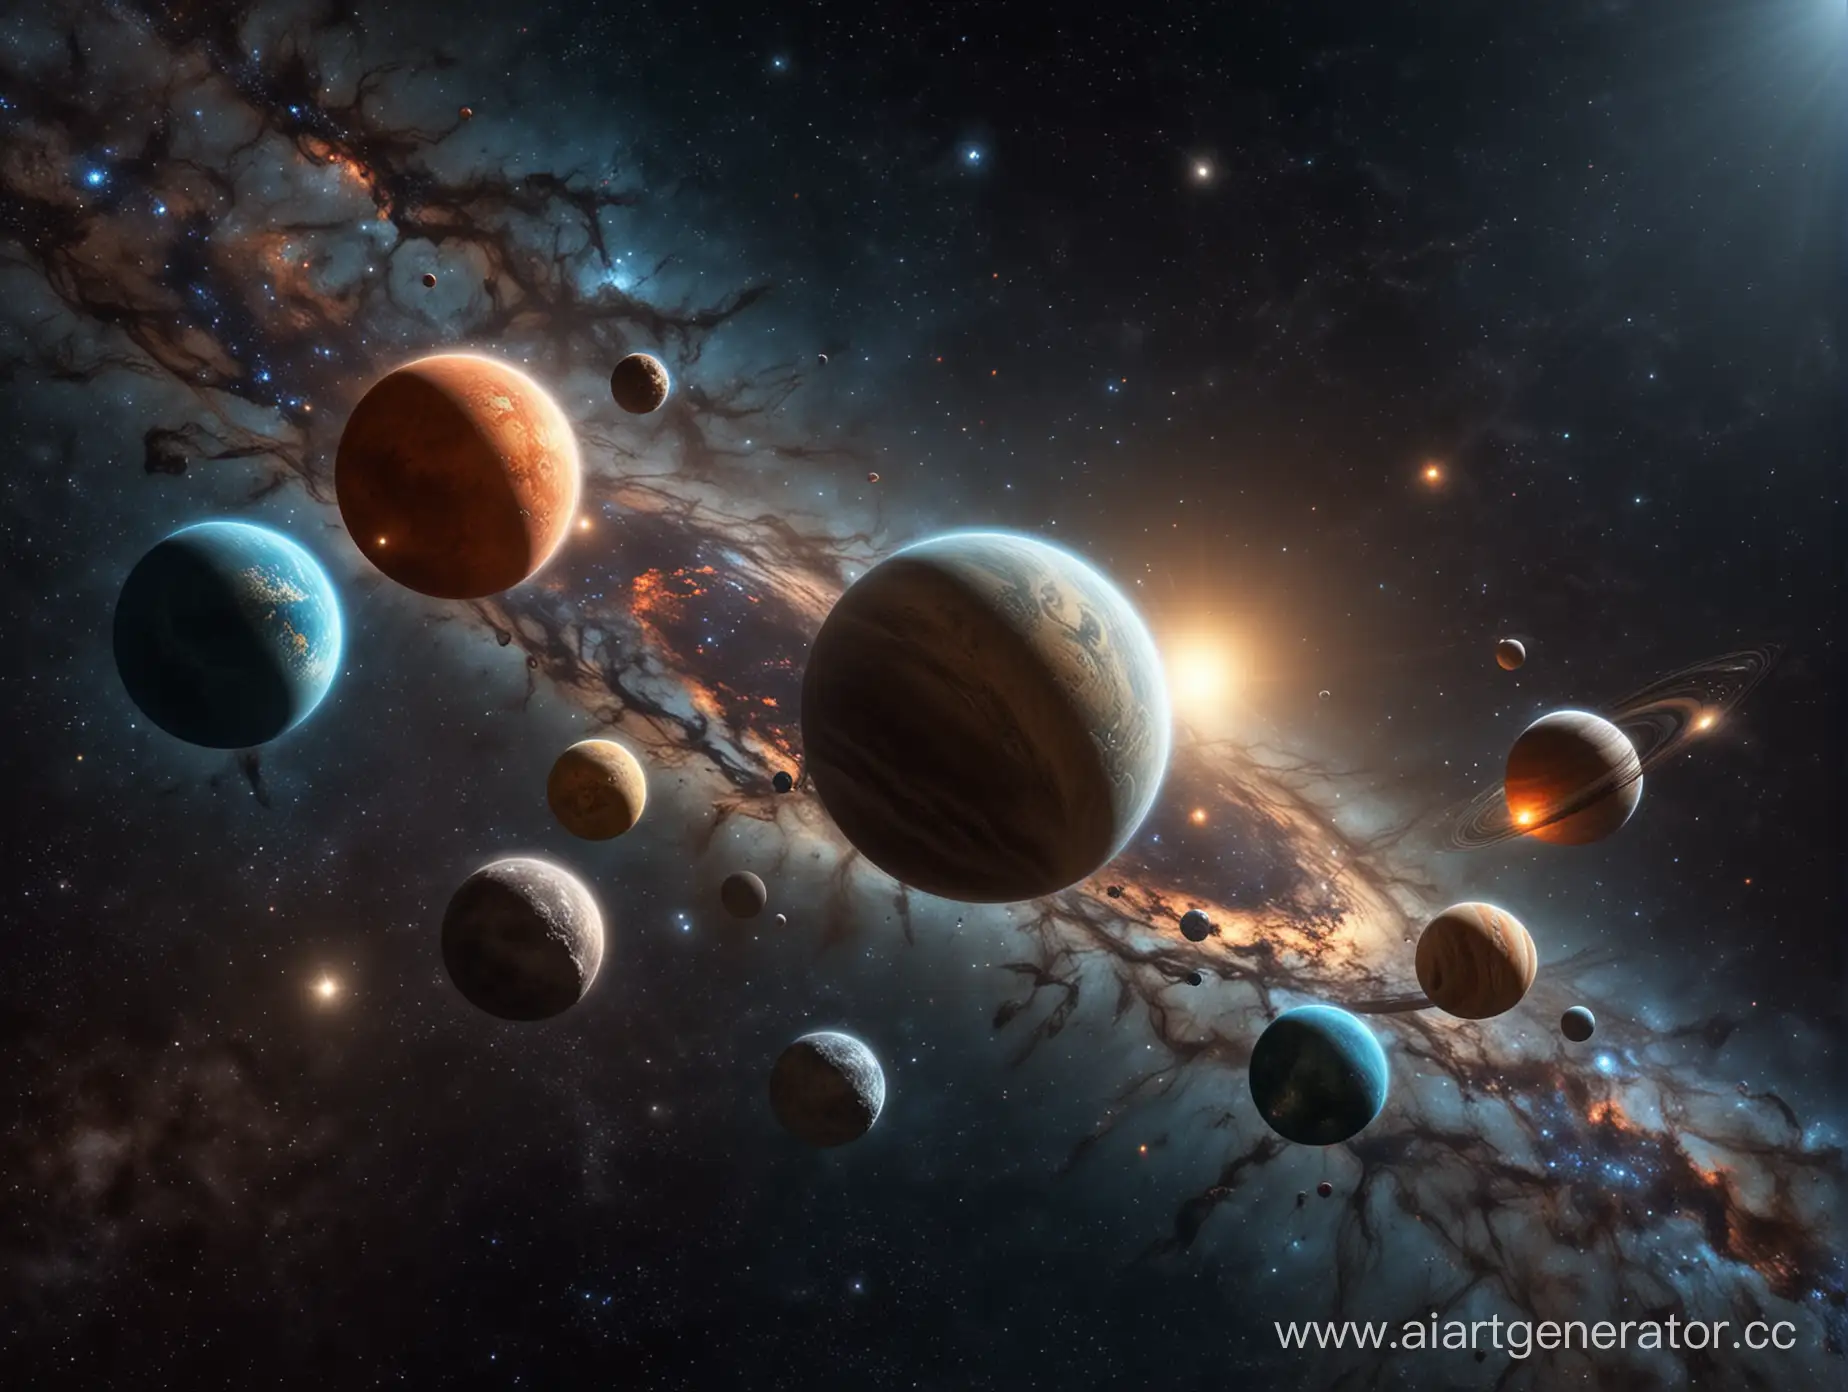 Futuristic-Star-System-with-Four-Planets-in-Space